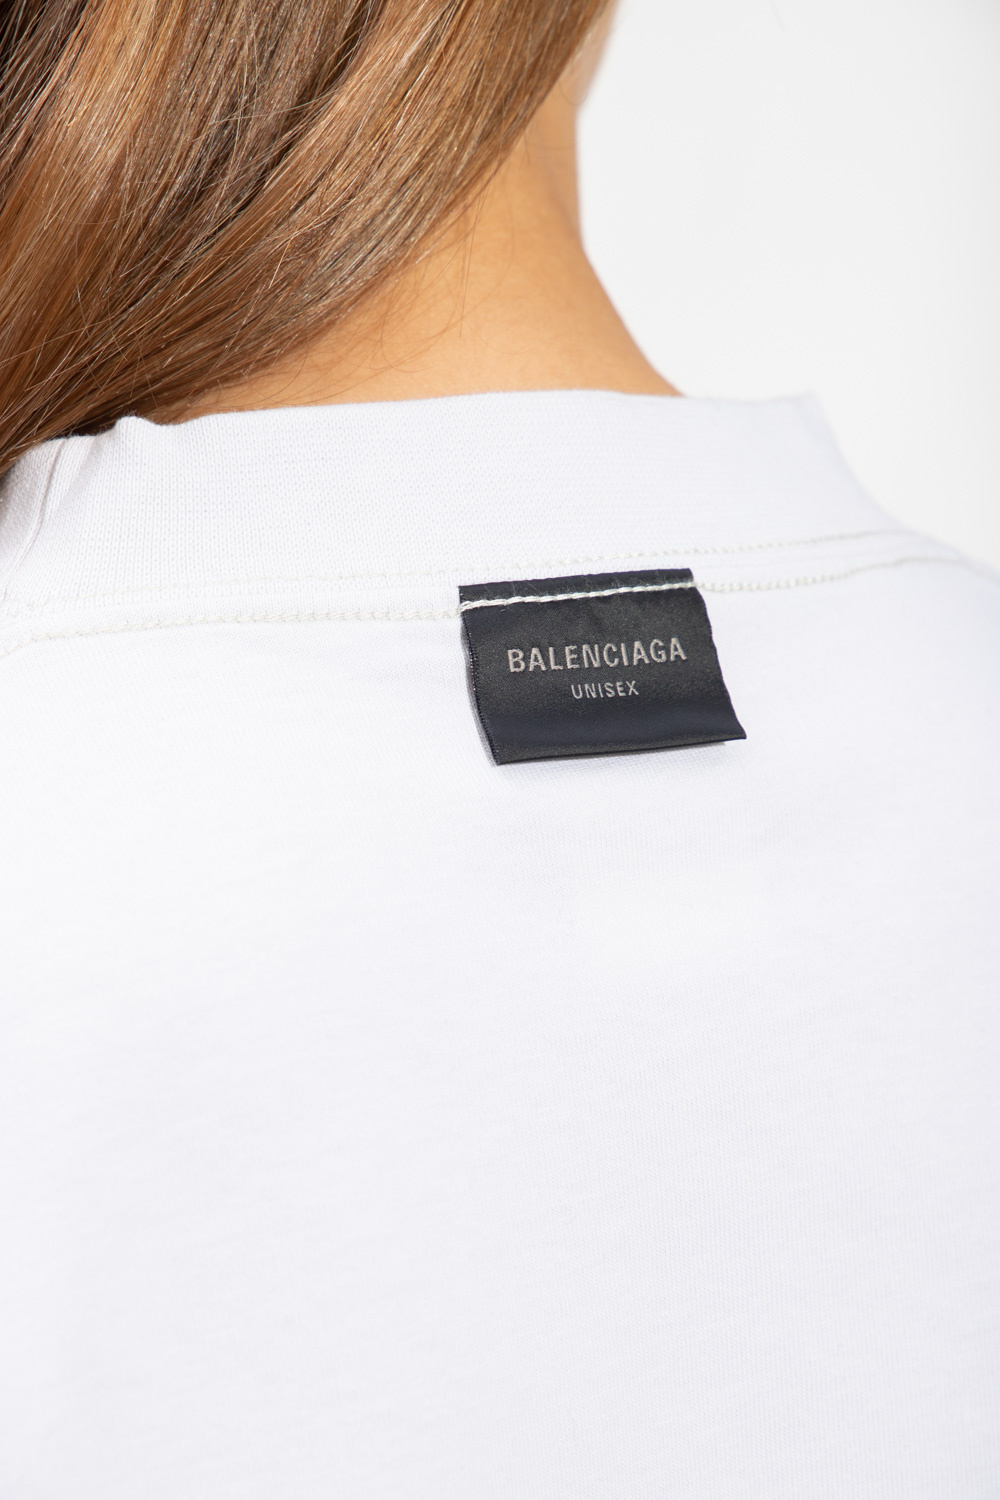 Balenciaga T-shirt with inside-out effect